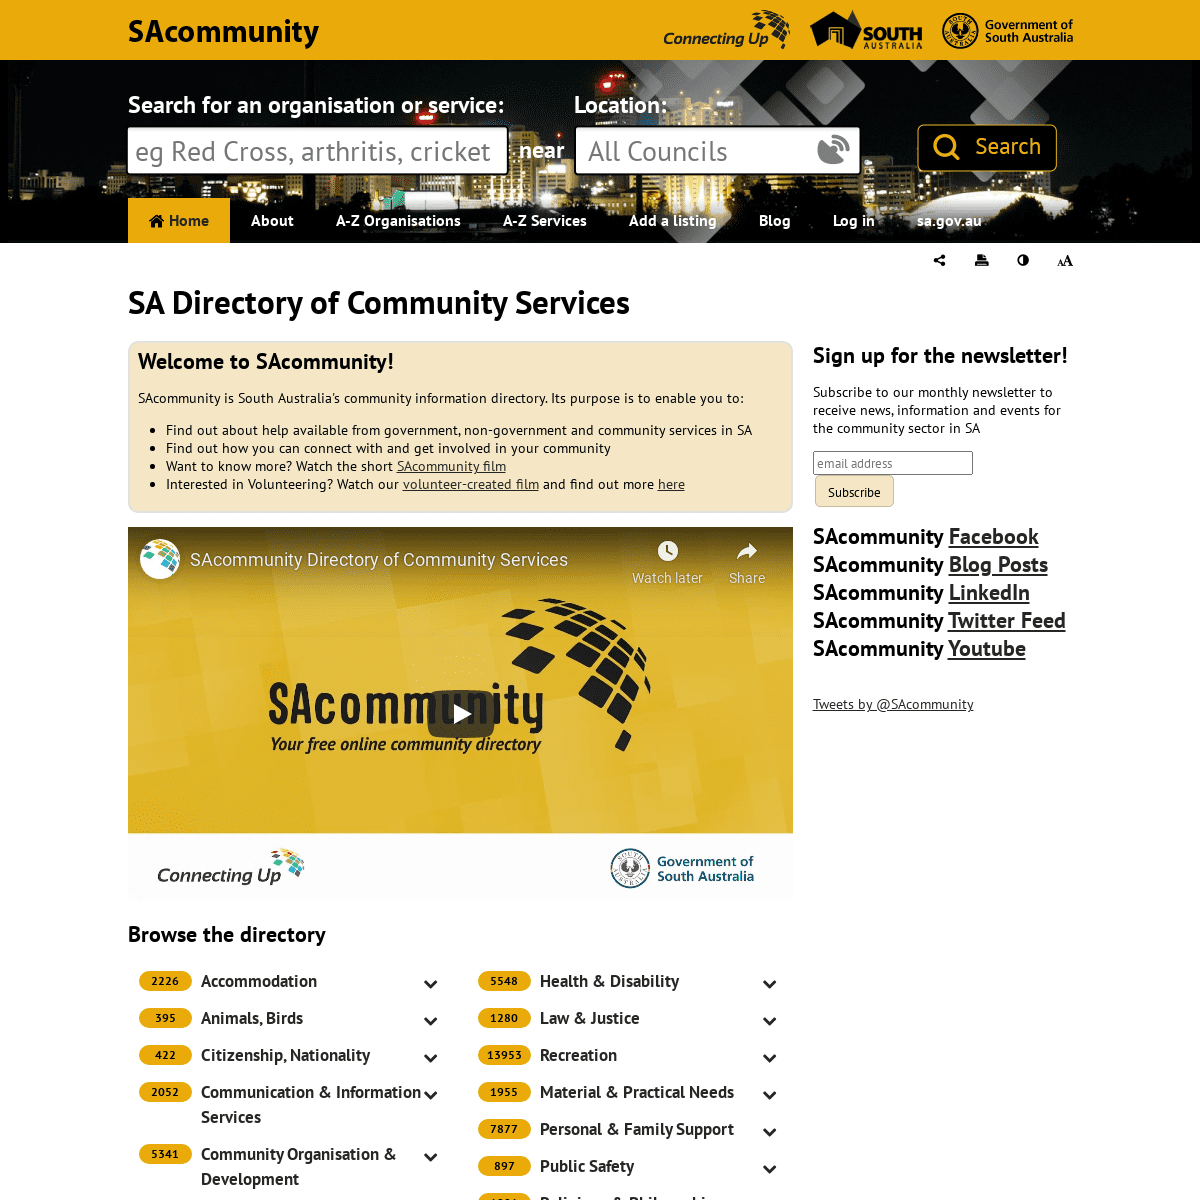 A complete backup of https://sacommunity.org